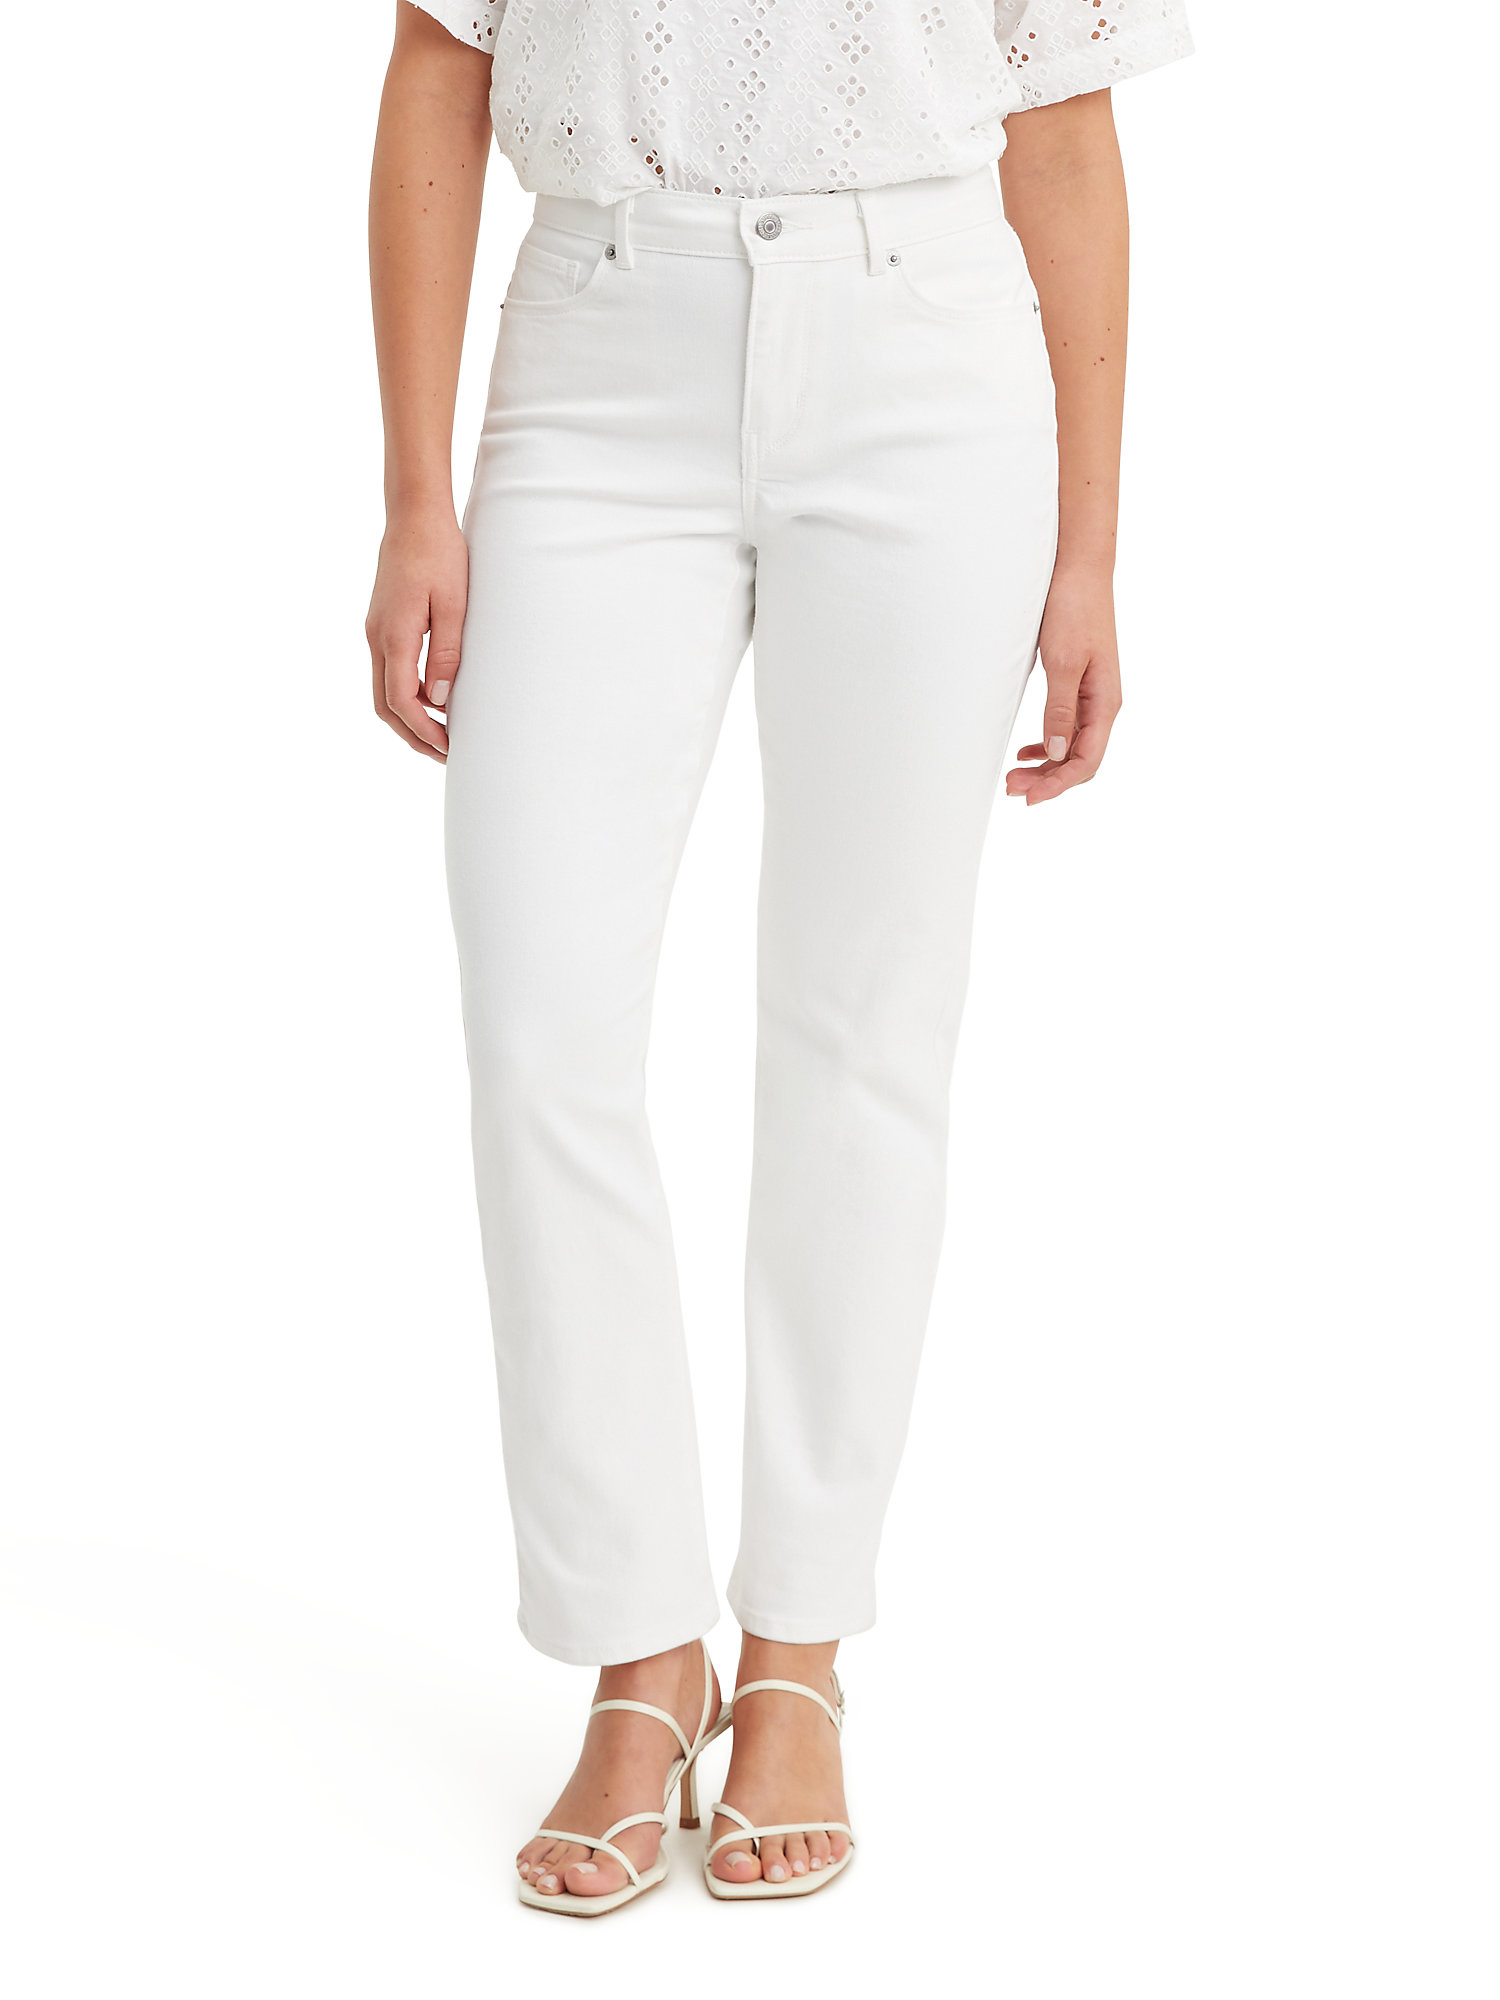 Levi’s Women's Classic Straight Fit Jeans - image 1 of 5